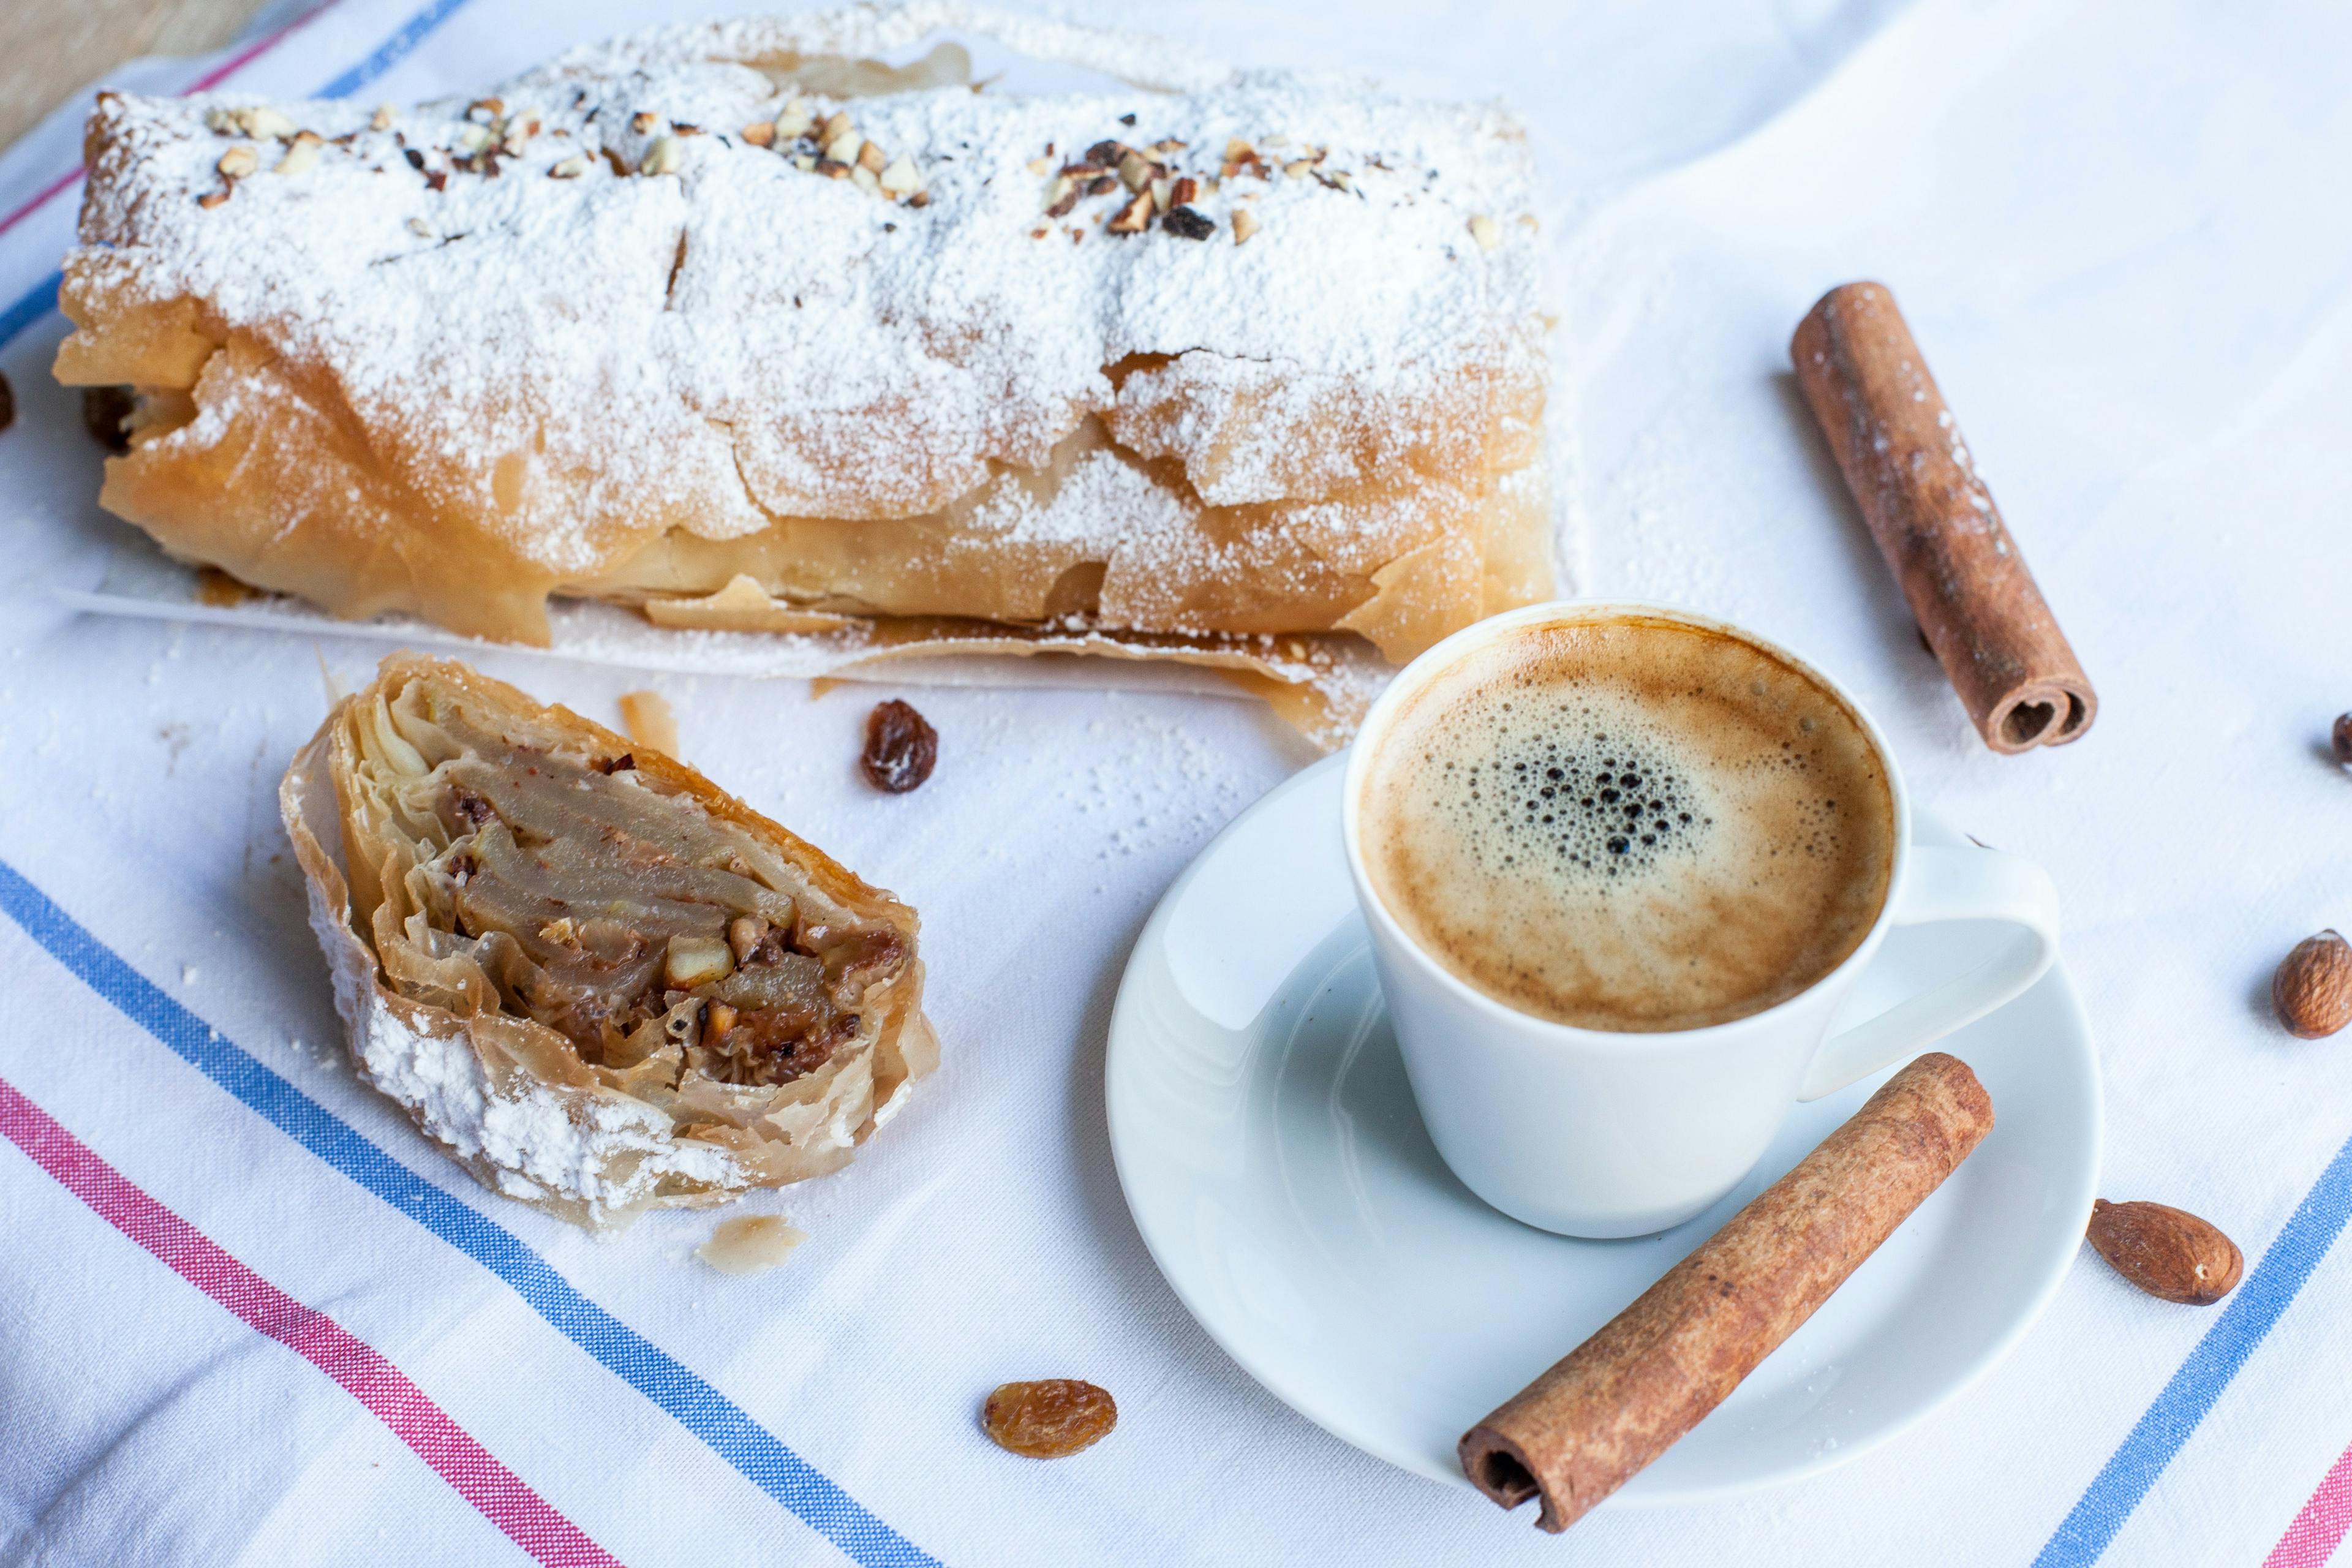 Apfelstrudel with cup of coffee